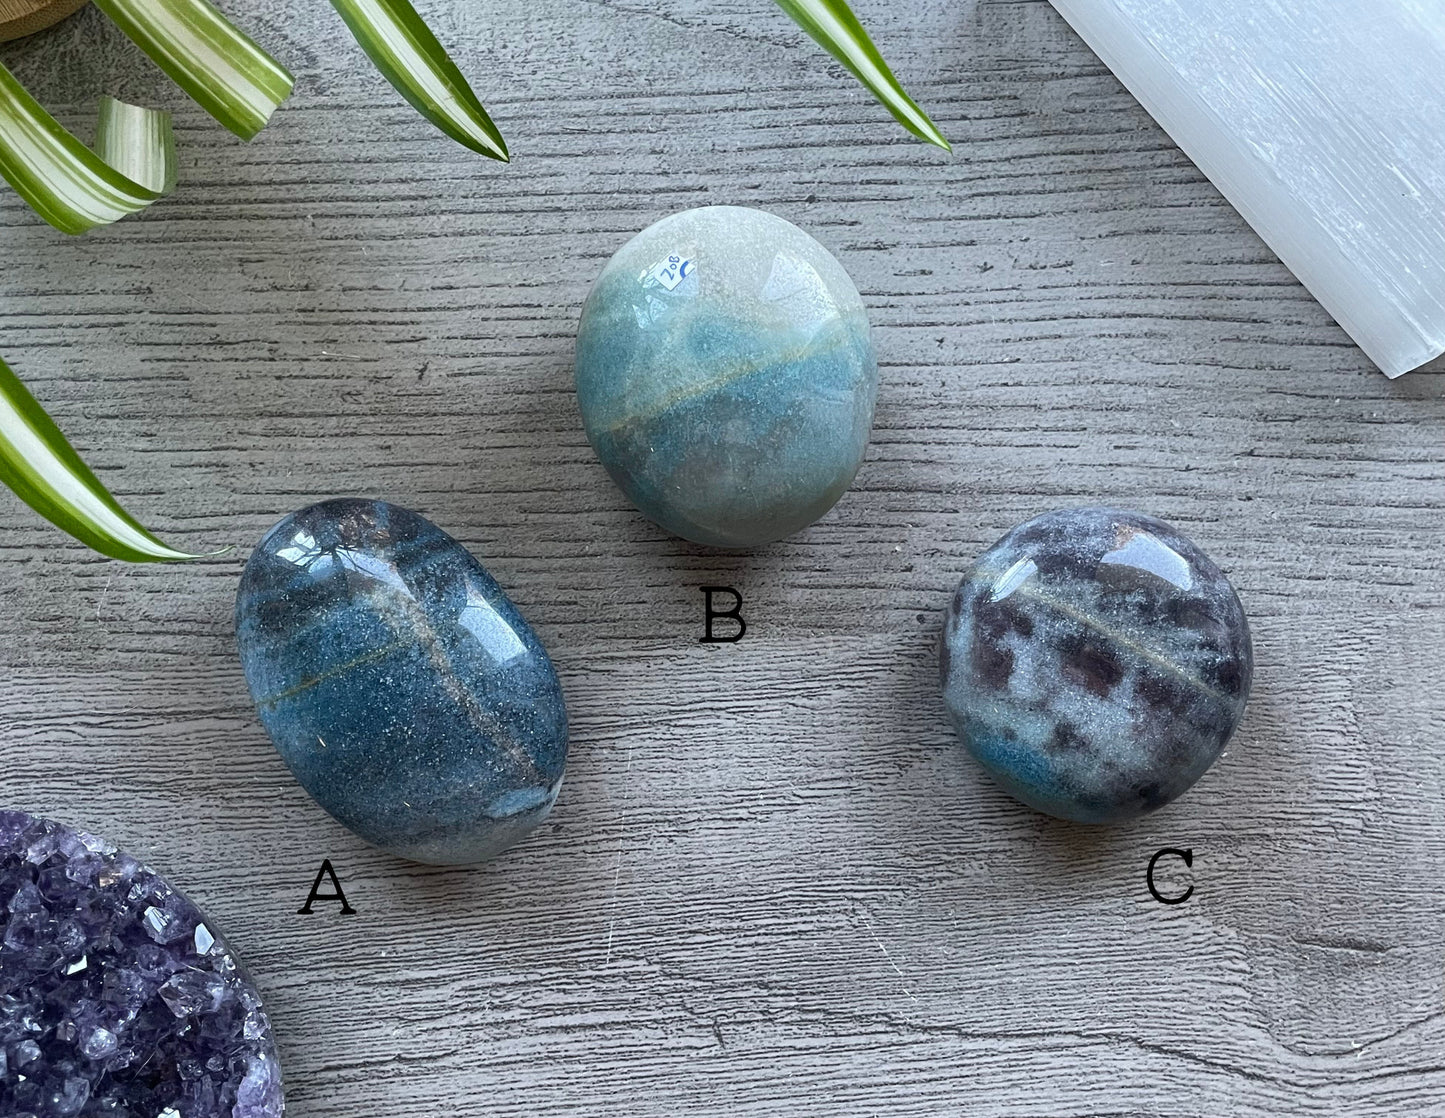 Pictured are various polished trolleite stones.